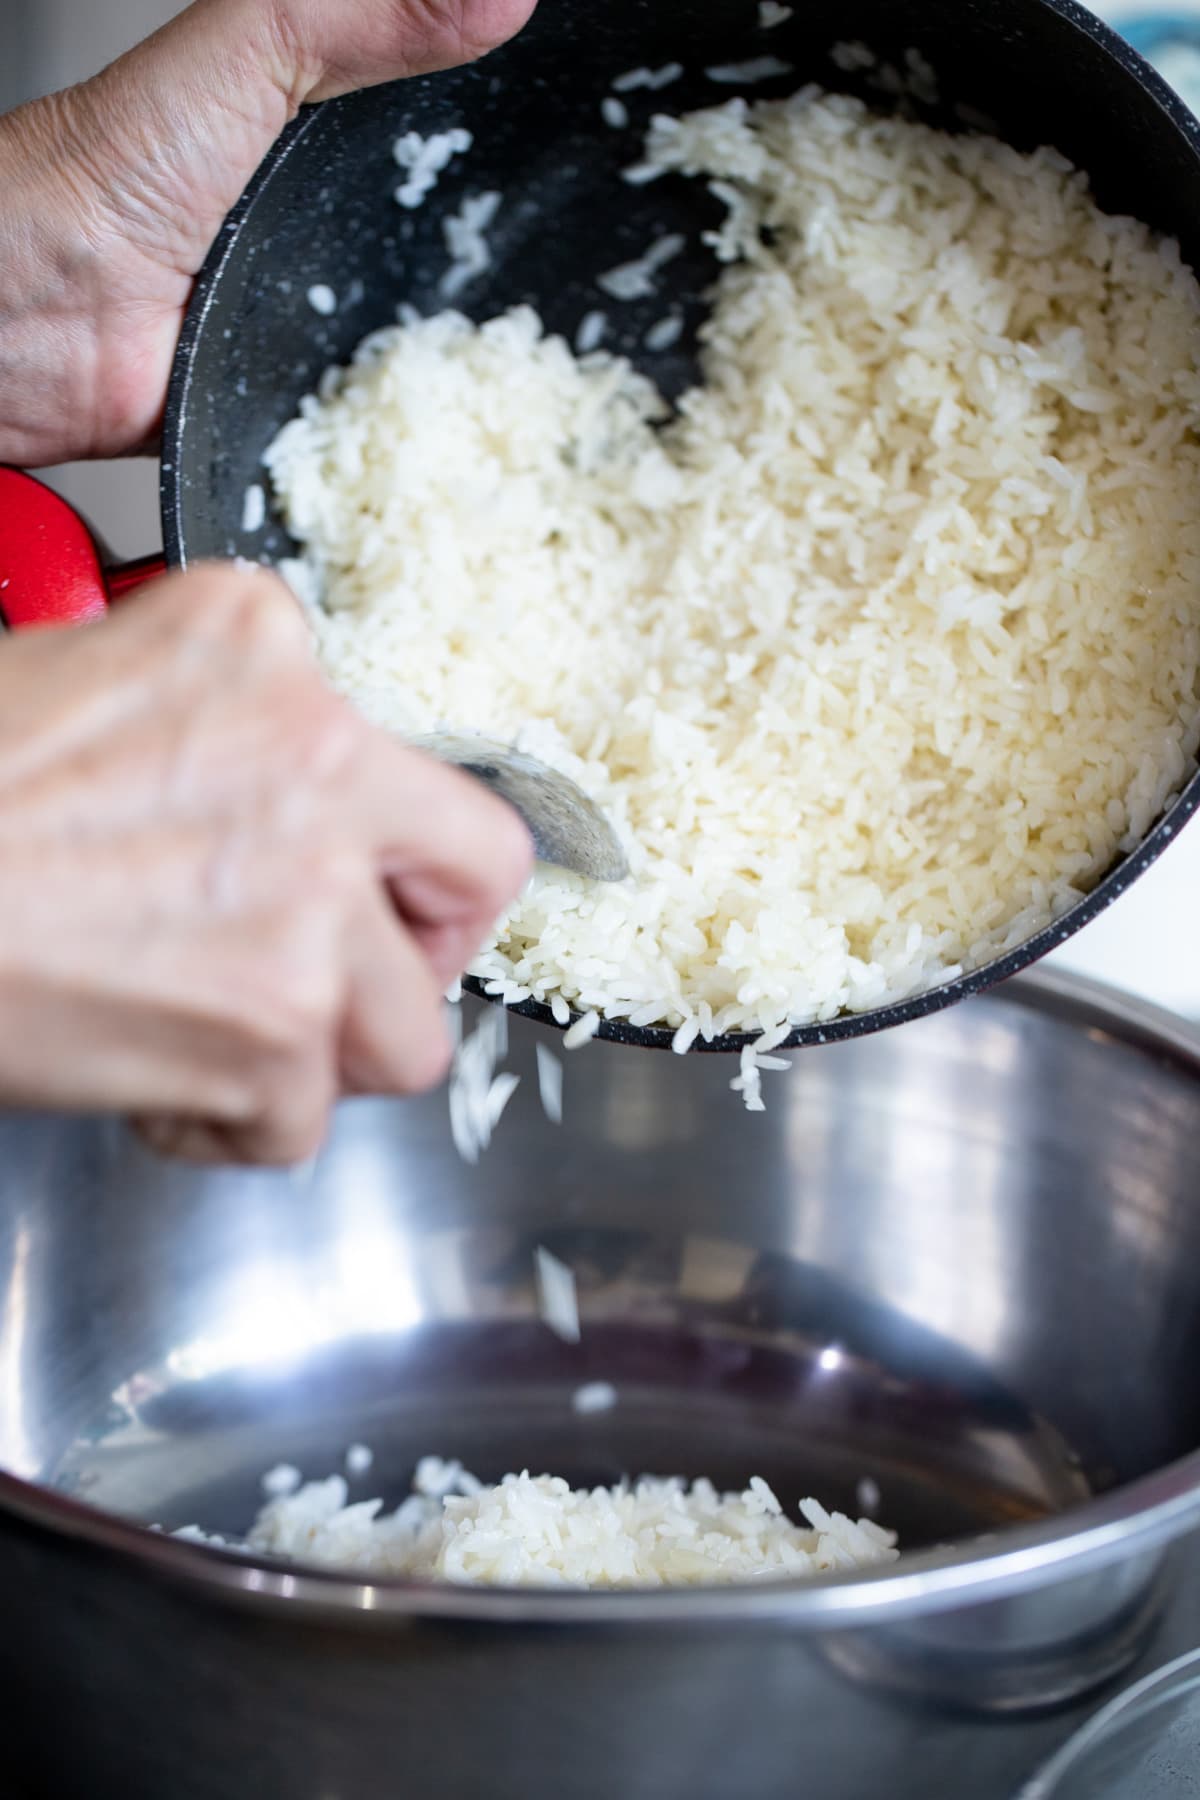 transferring cooked rice to a bowl